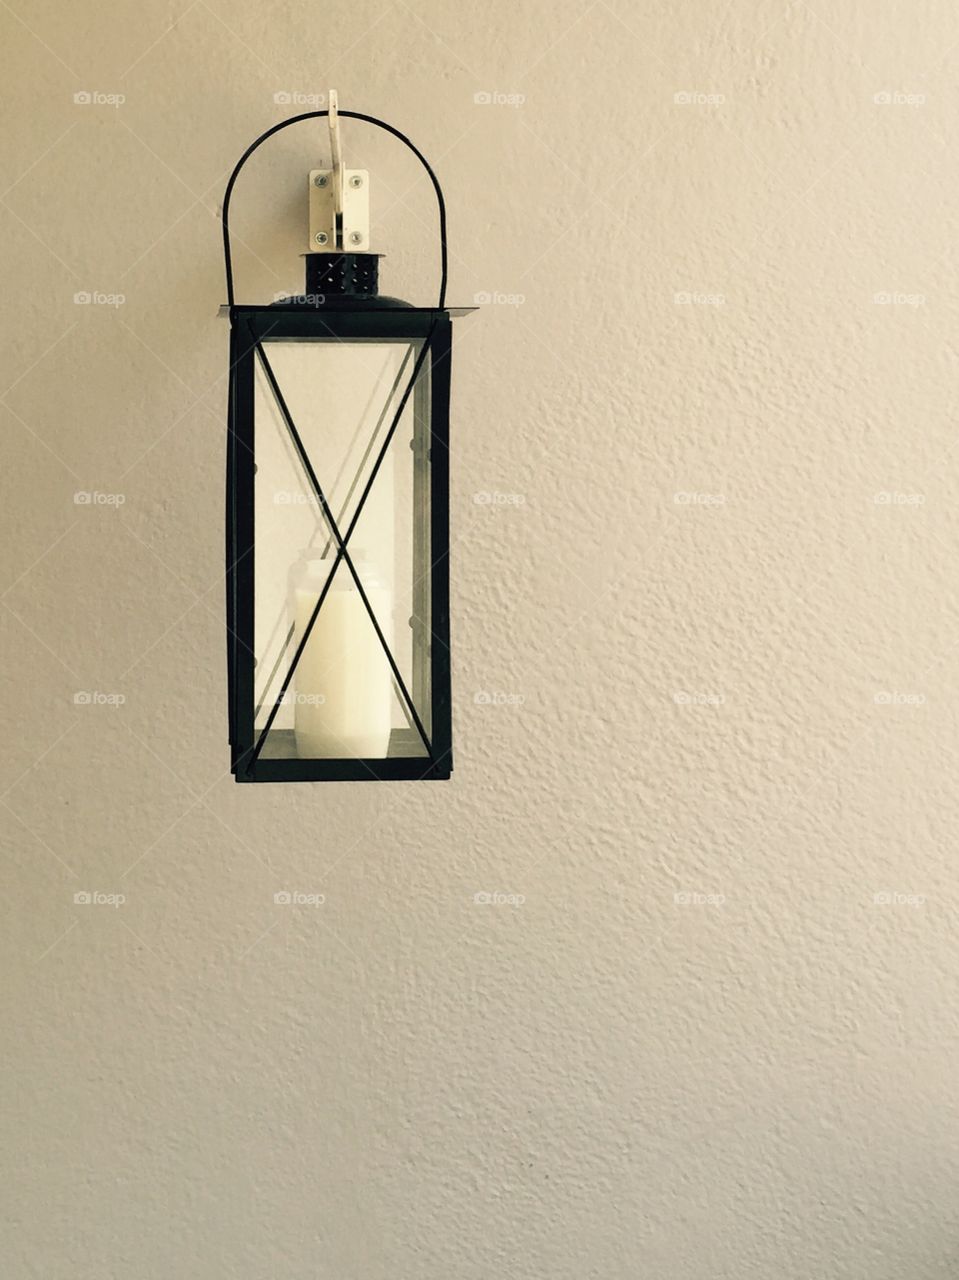 Lantern on the wall. Simple metal candle lantern on the light wall background